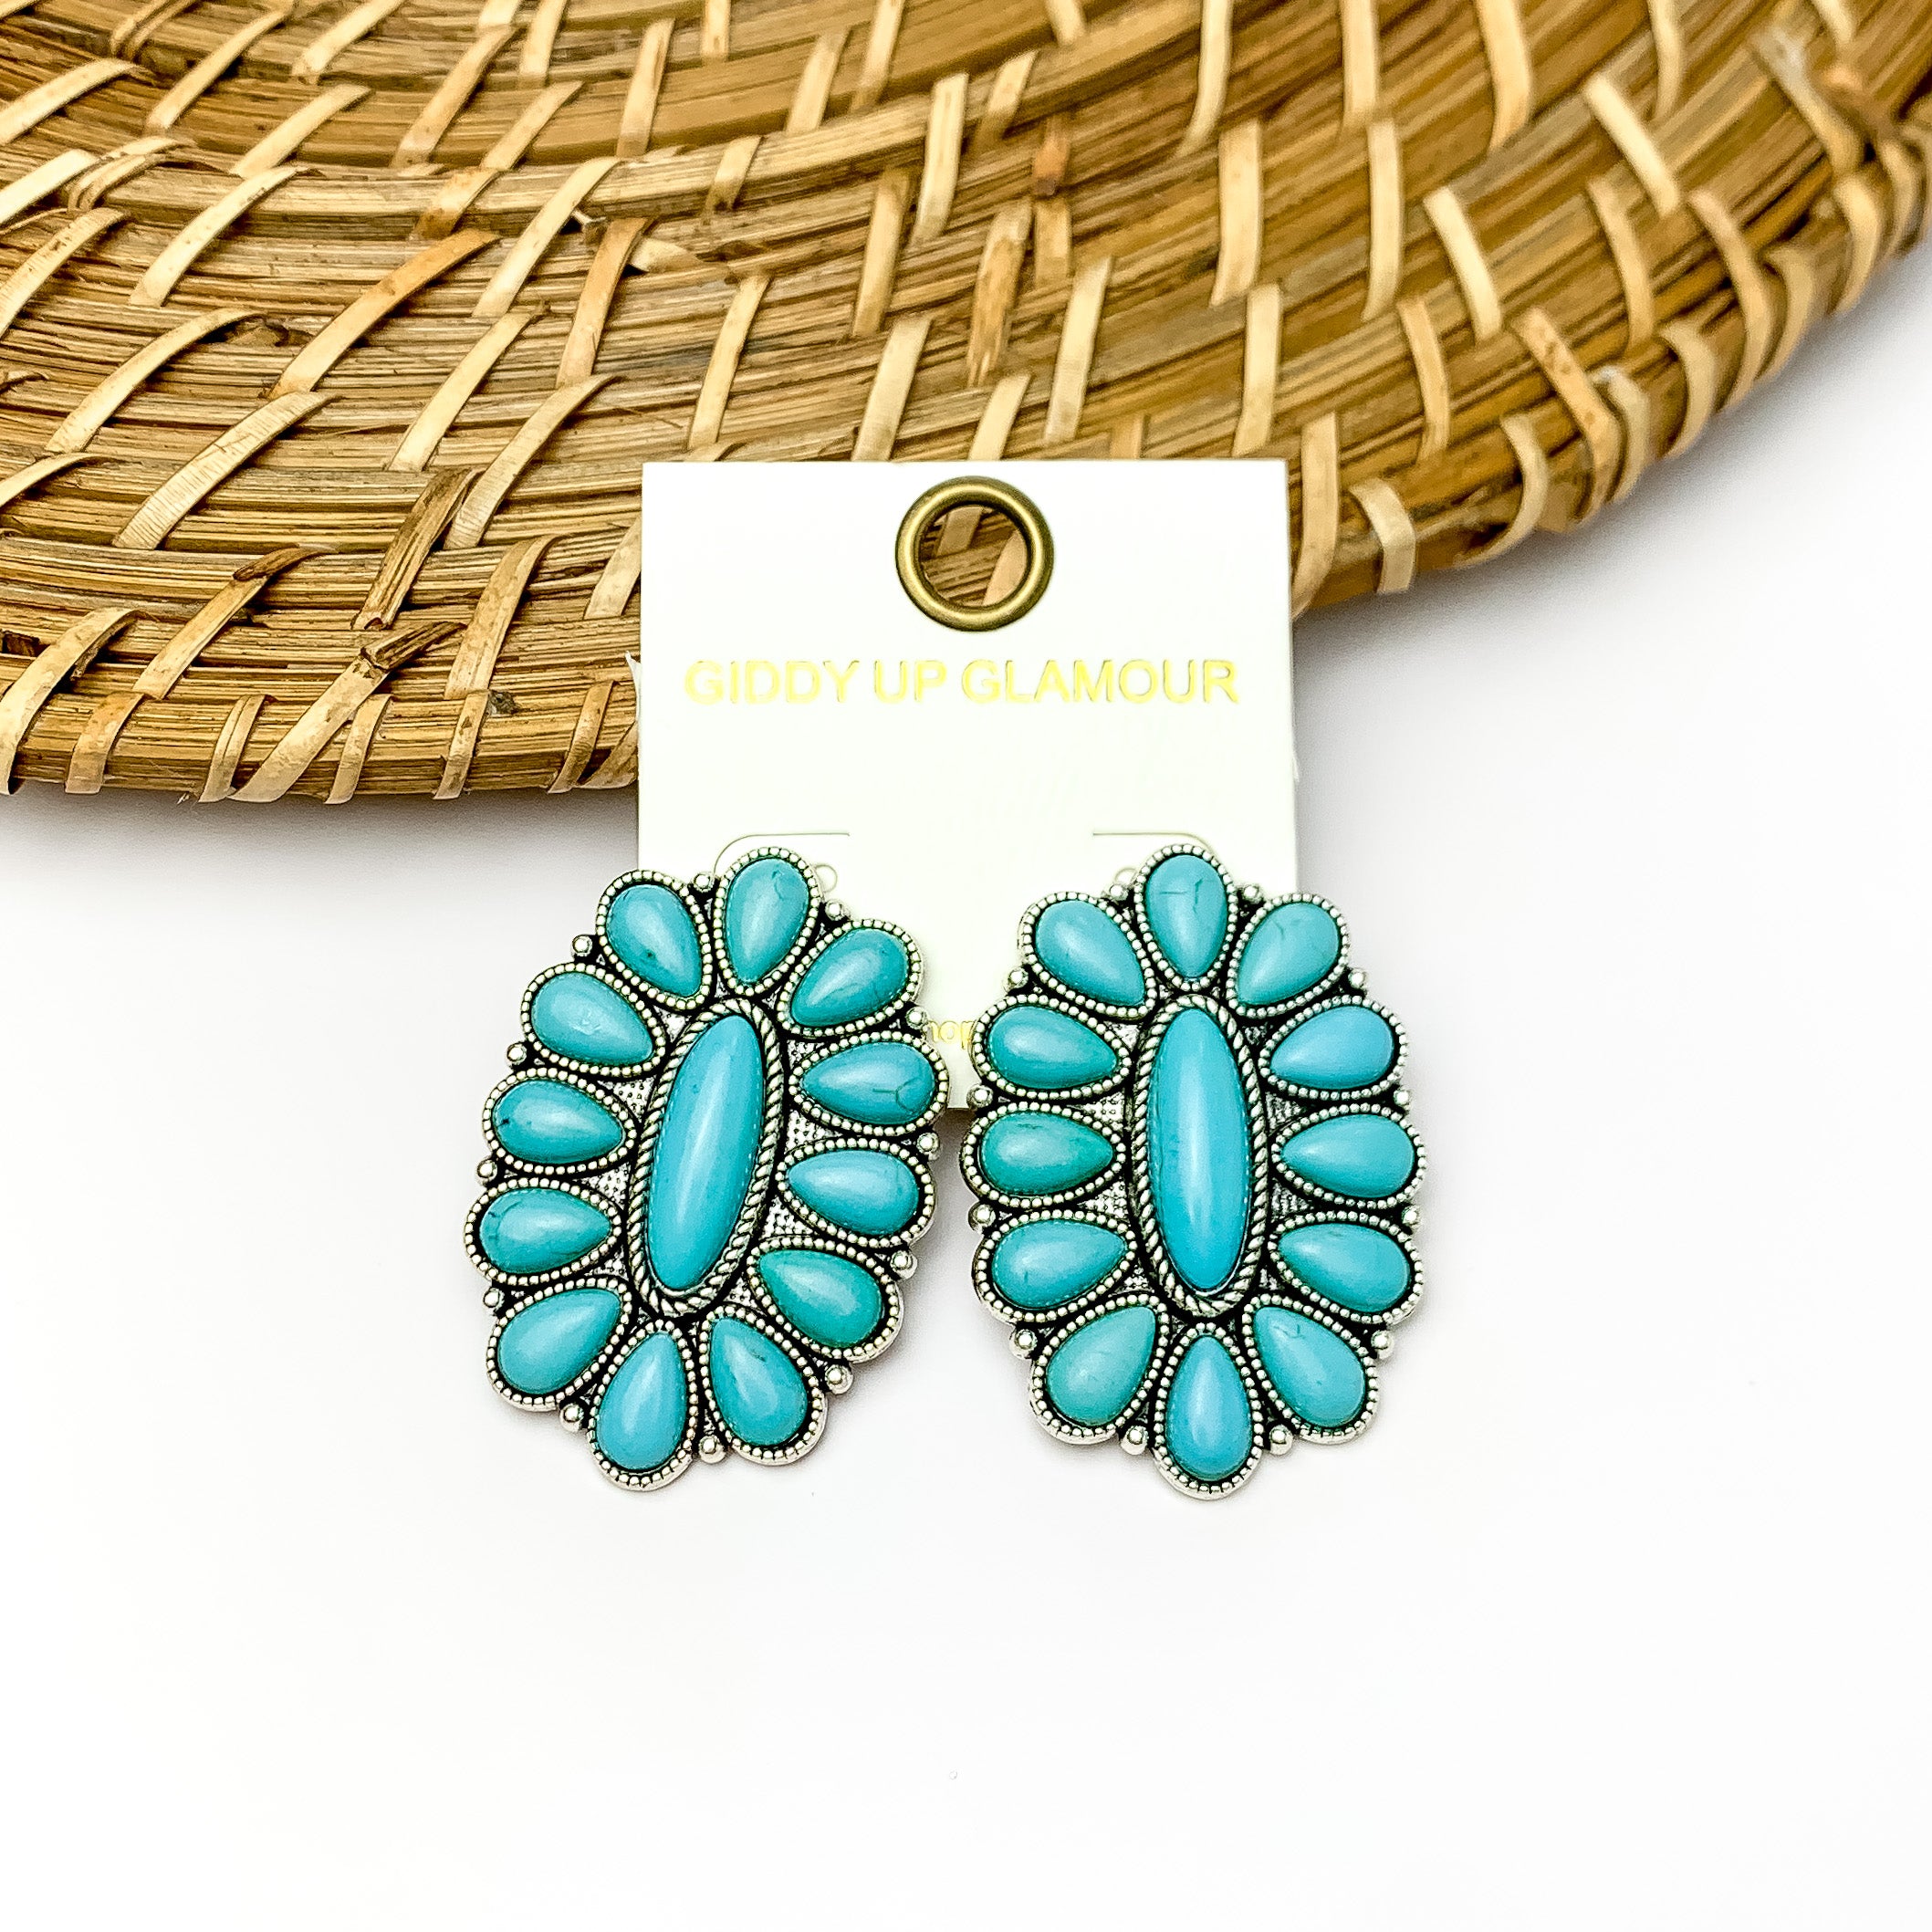 Turquoise and silver tone flower drop earrings. Pictured on a white background with a wood like decoration at the top.